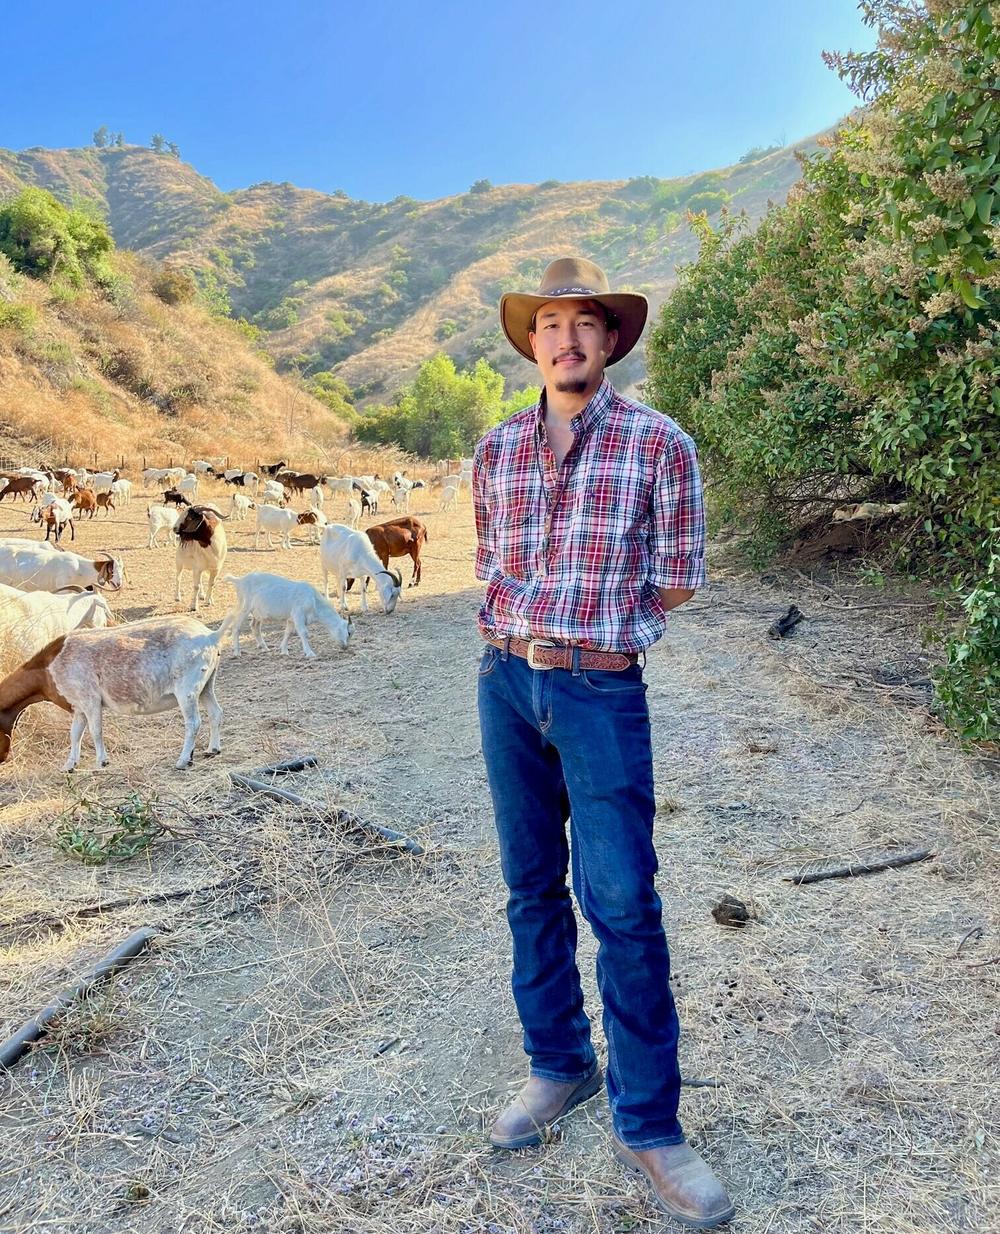 Michael Choi, 30, has taken over the family business. After the drought-busting rains of last winter, he said he's had to buy hundreds of new goats to keep up with the demand of jobs.